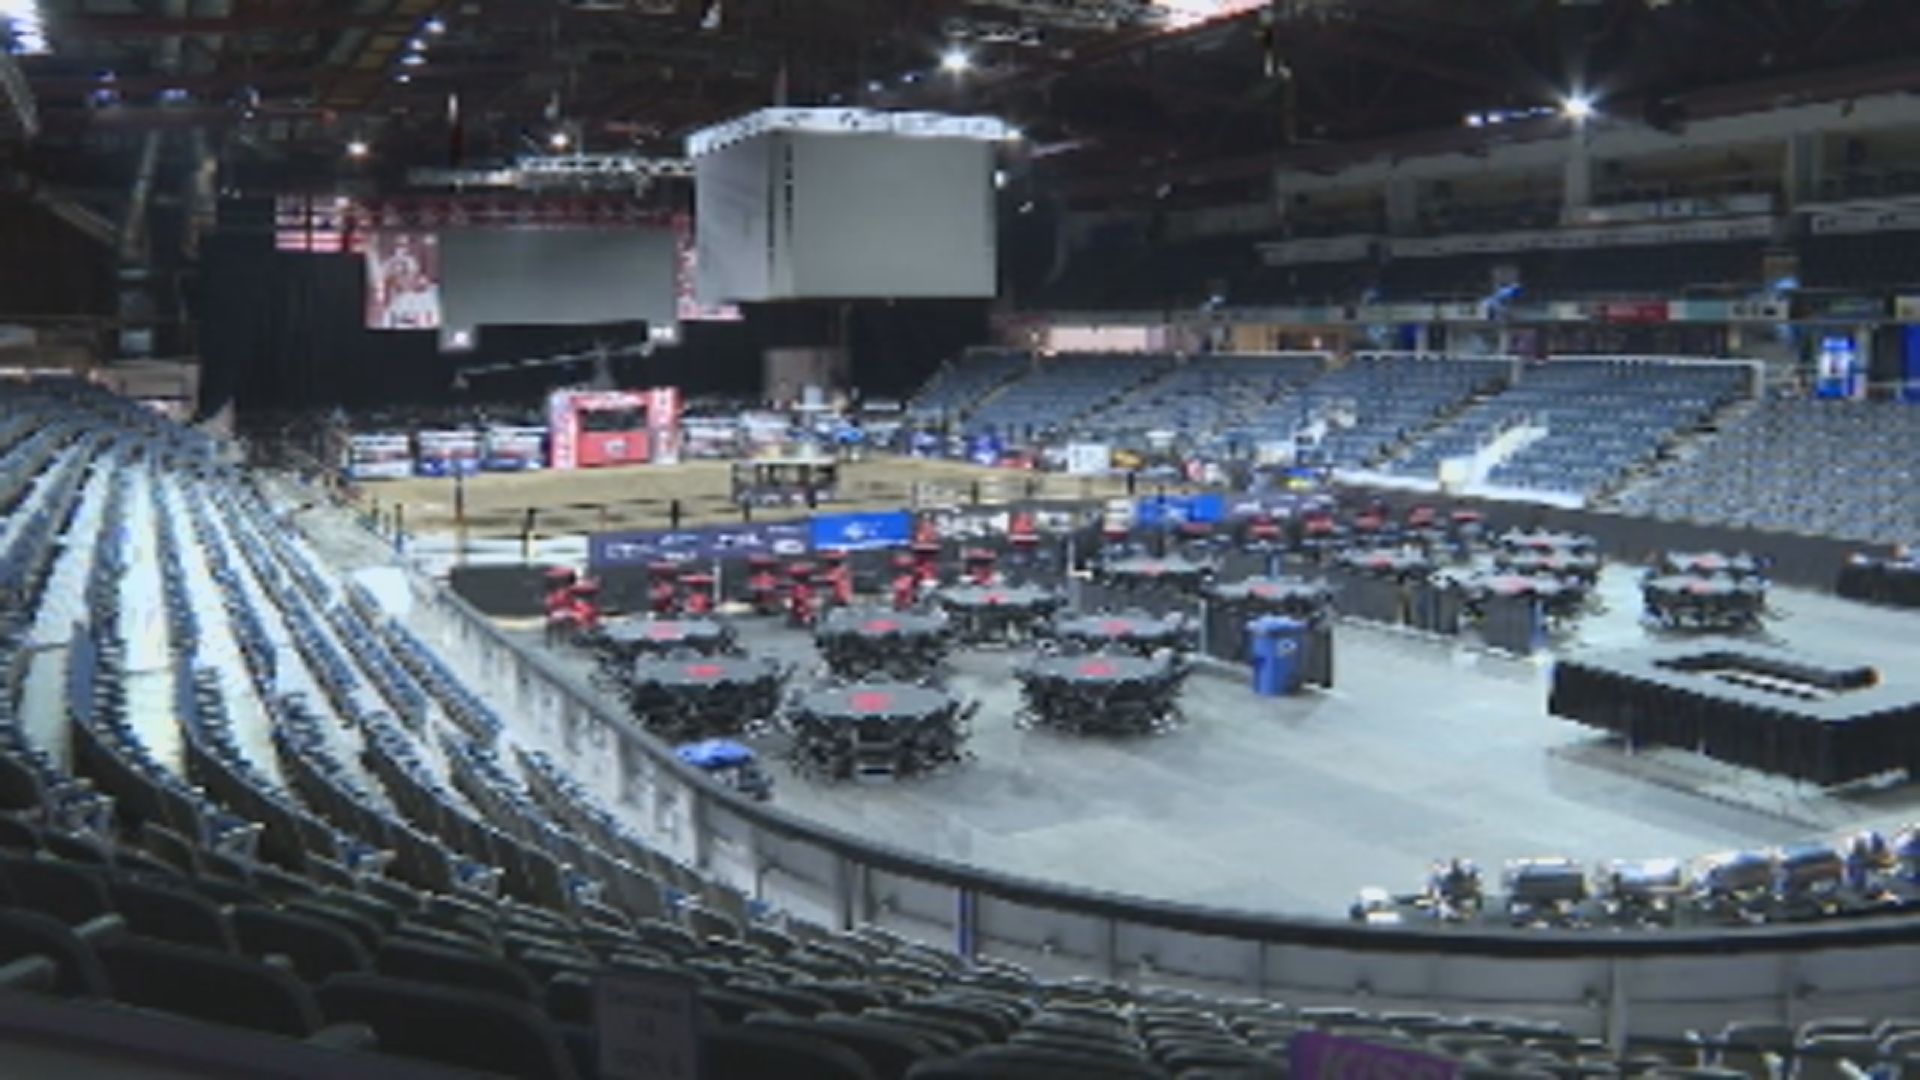 PBR comes to Lethbridge with potential economic boon